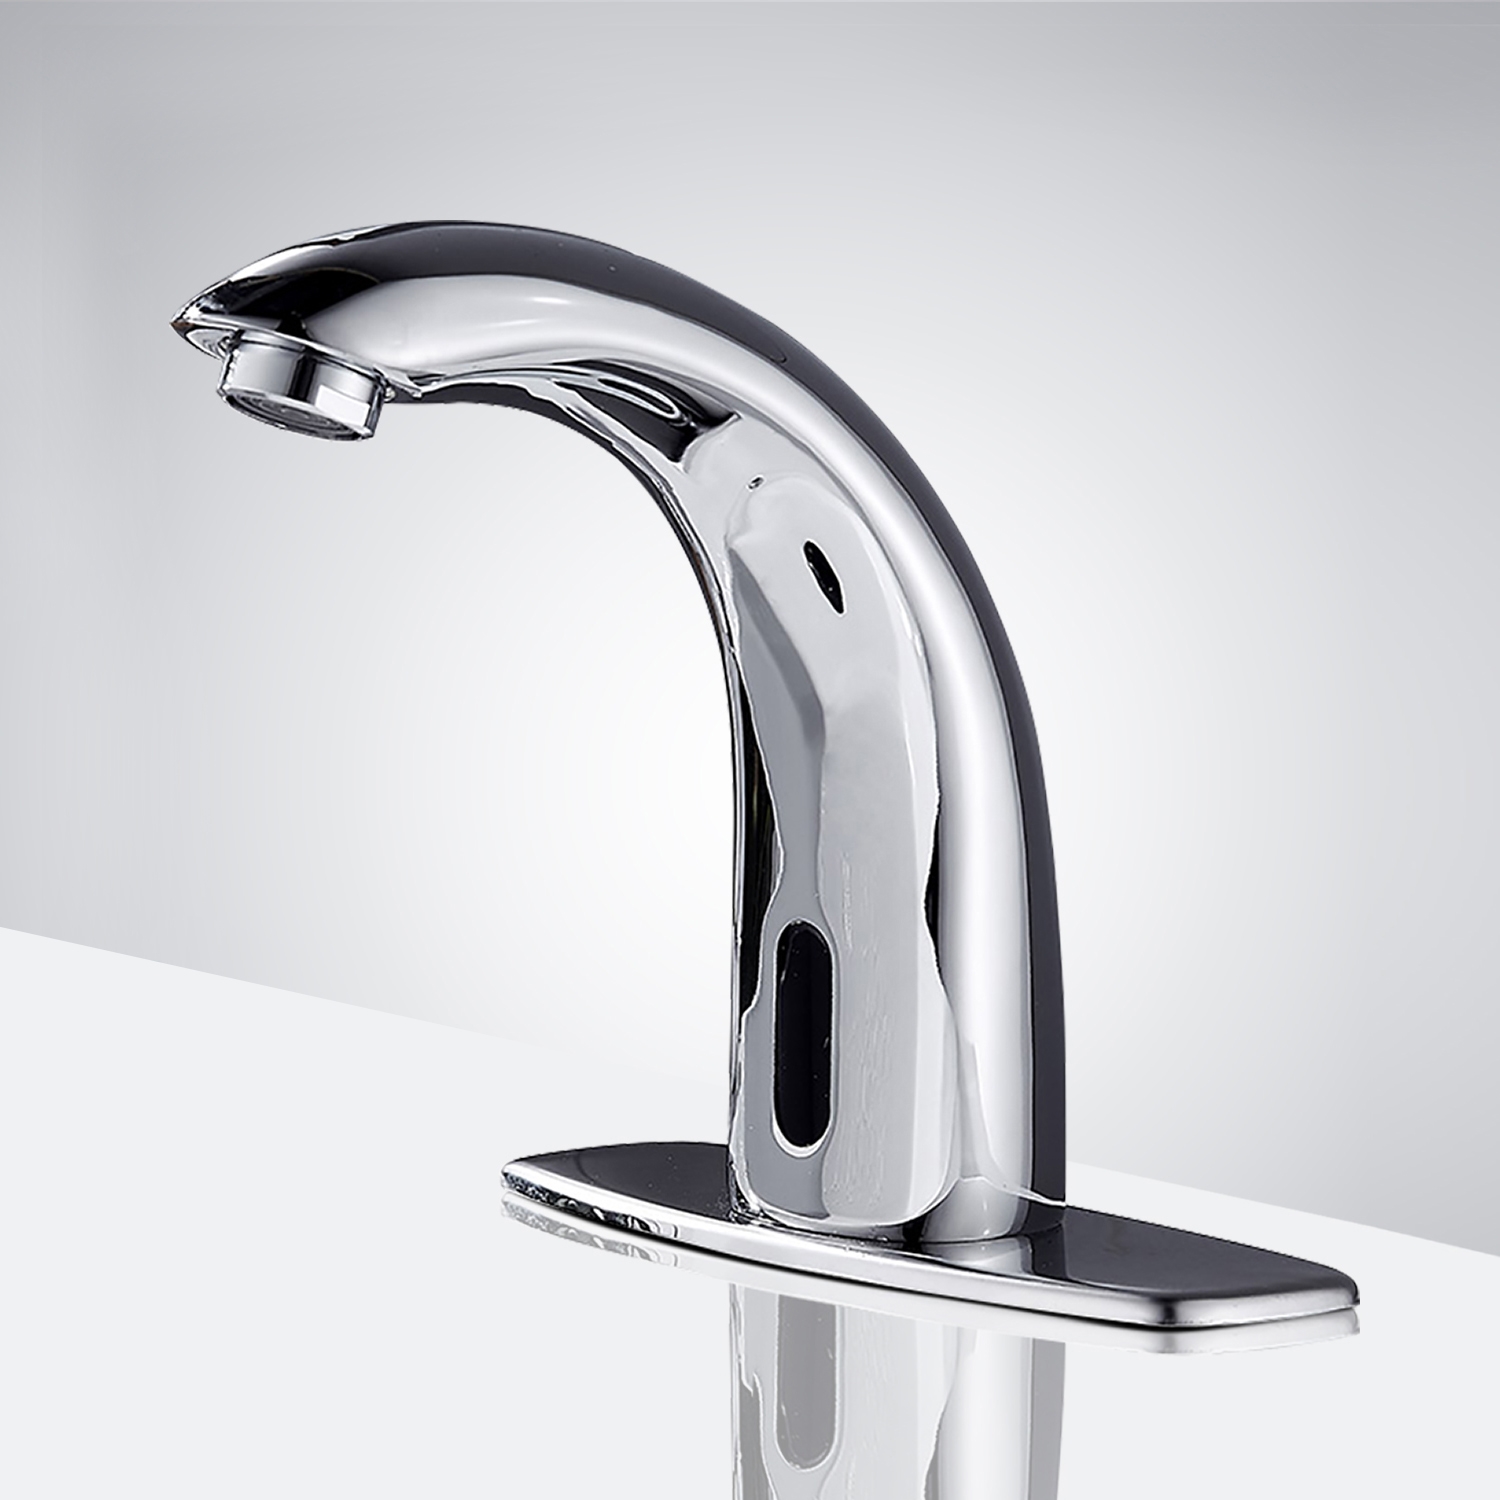 Contemporary touchless bathroom faucets